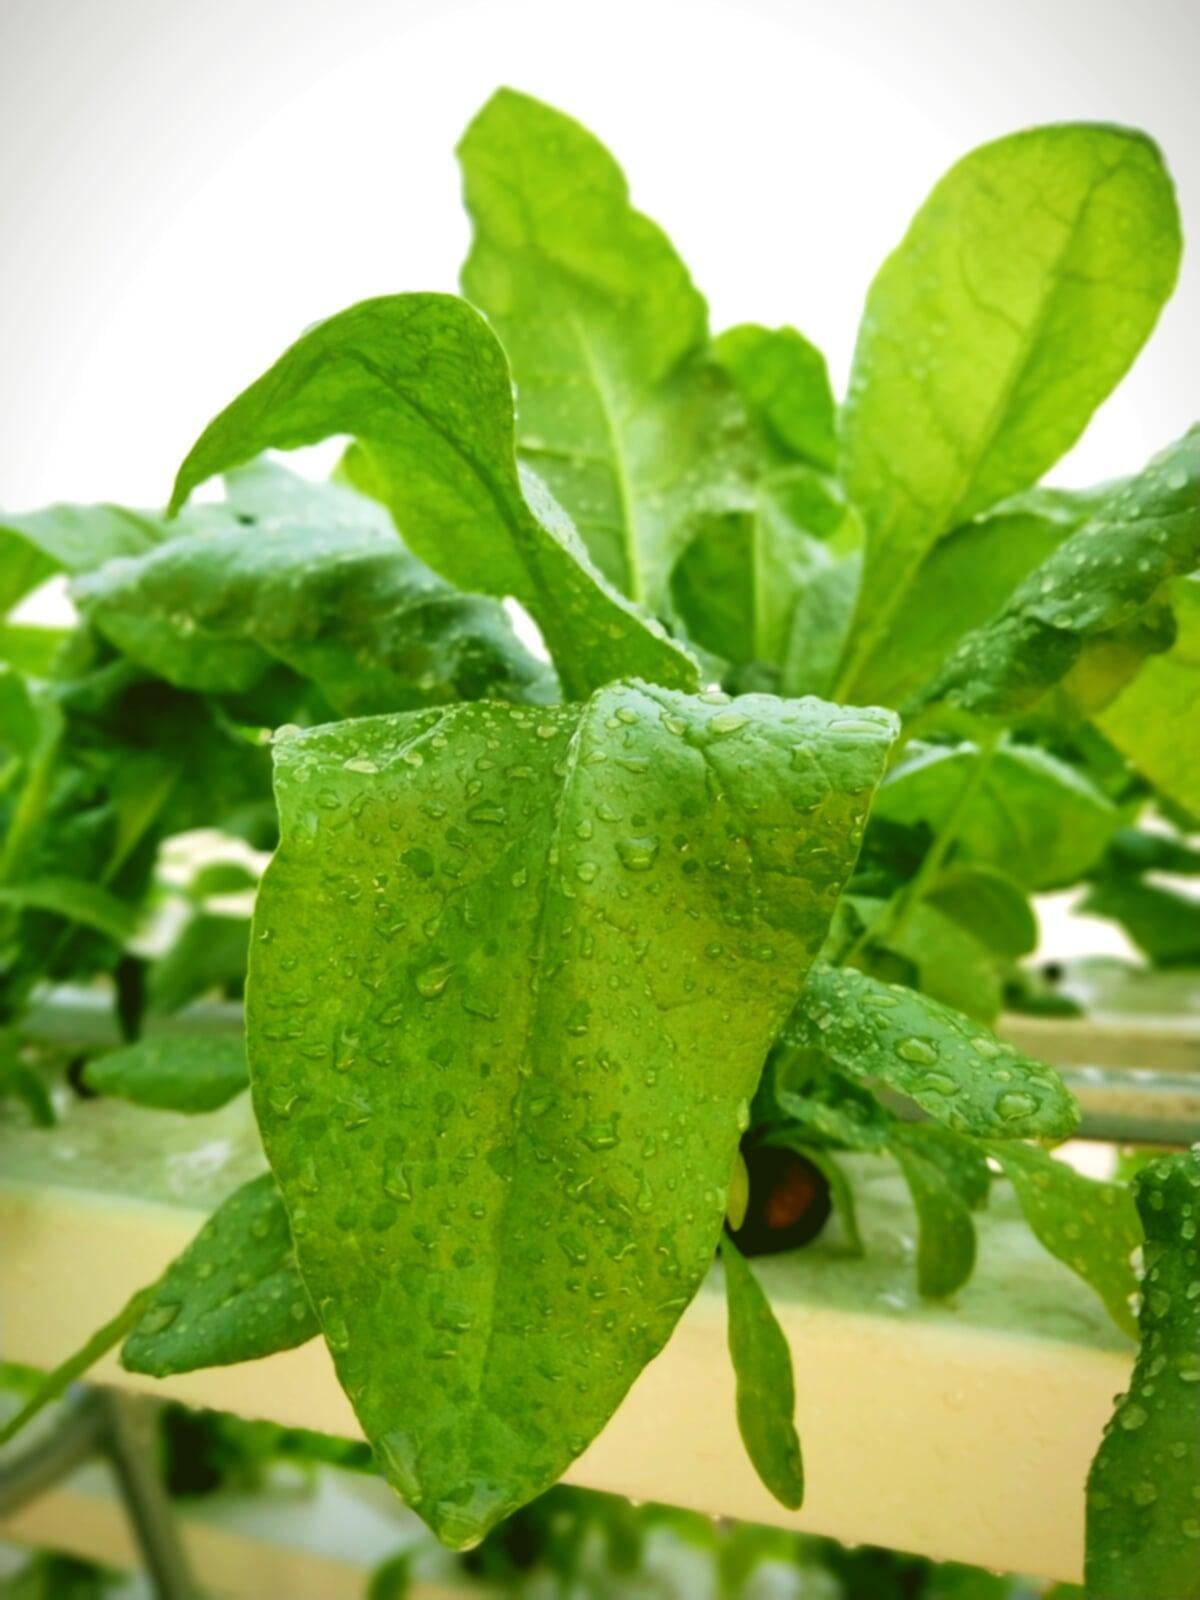 Spinach – A small amount of pesticide can turn this superfood into a nightmare for your health